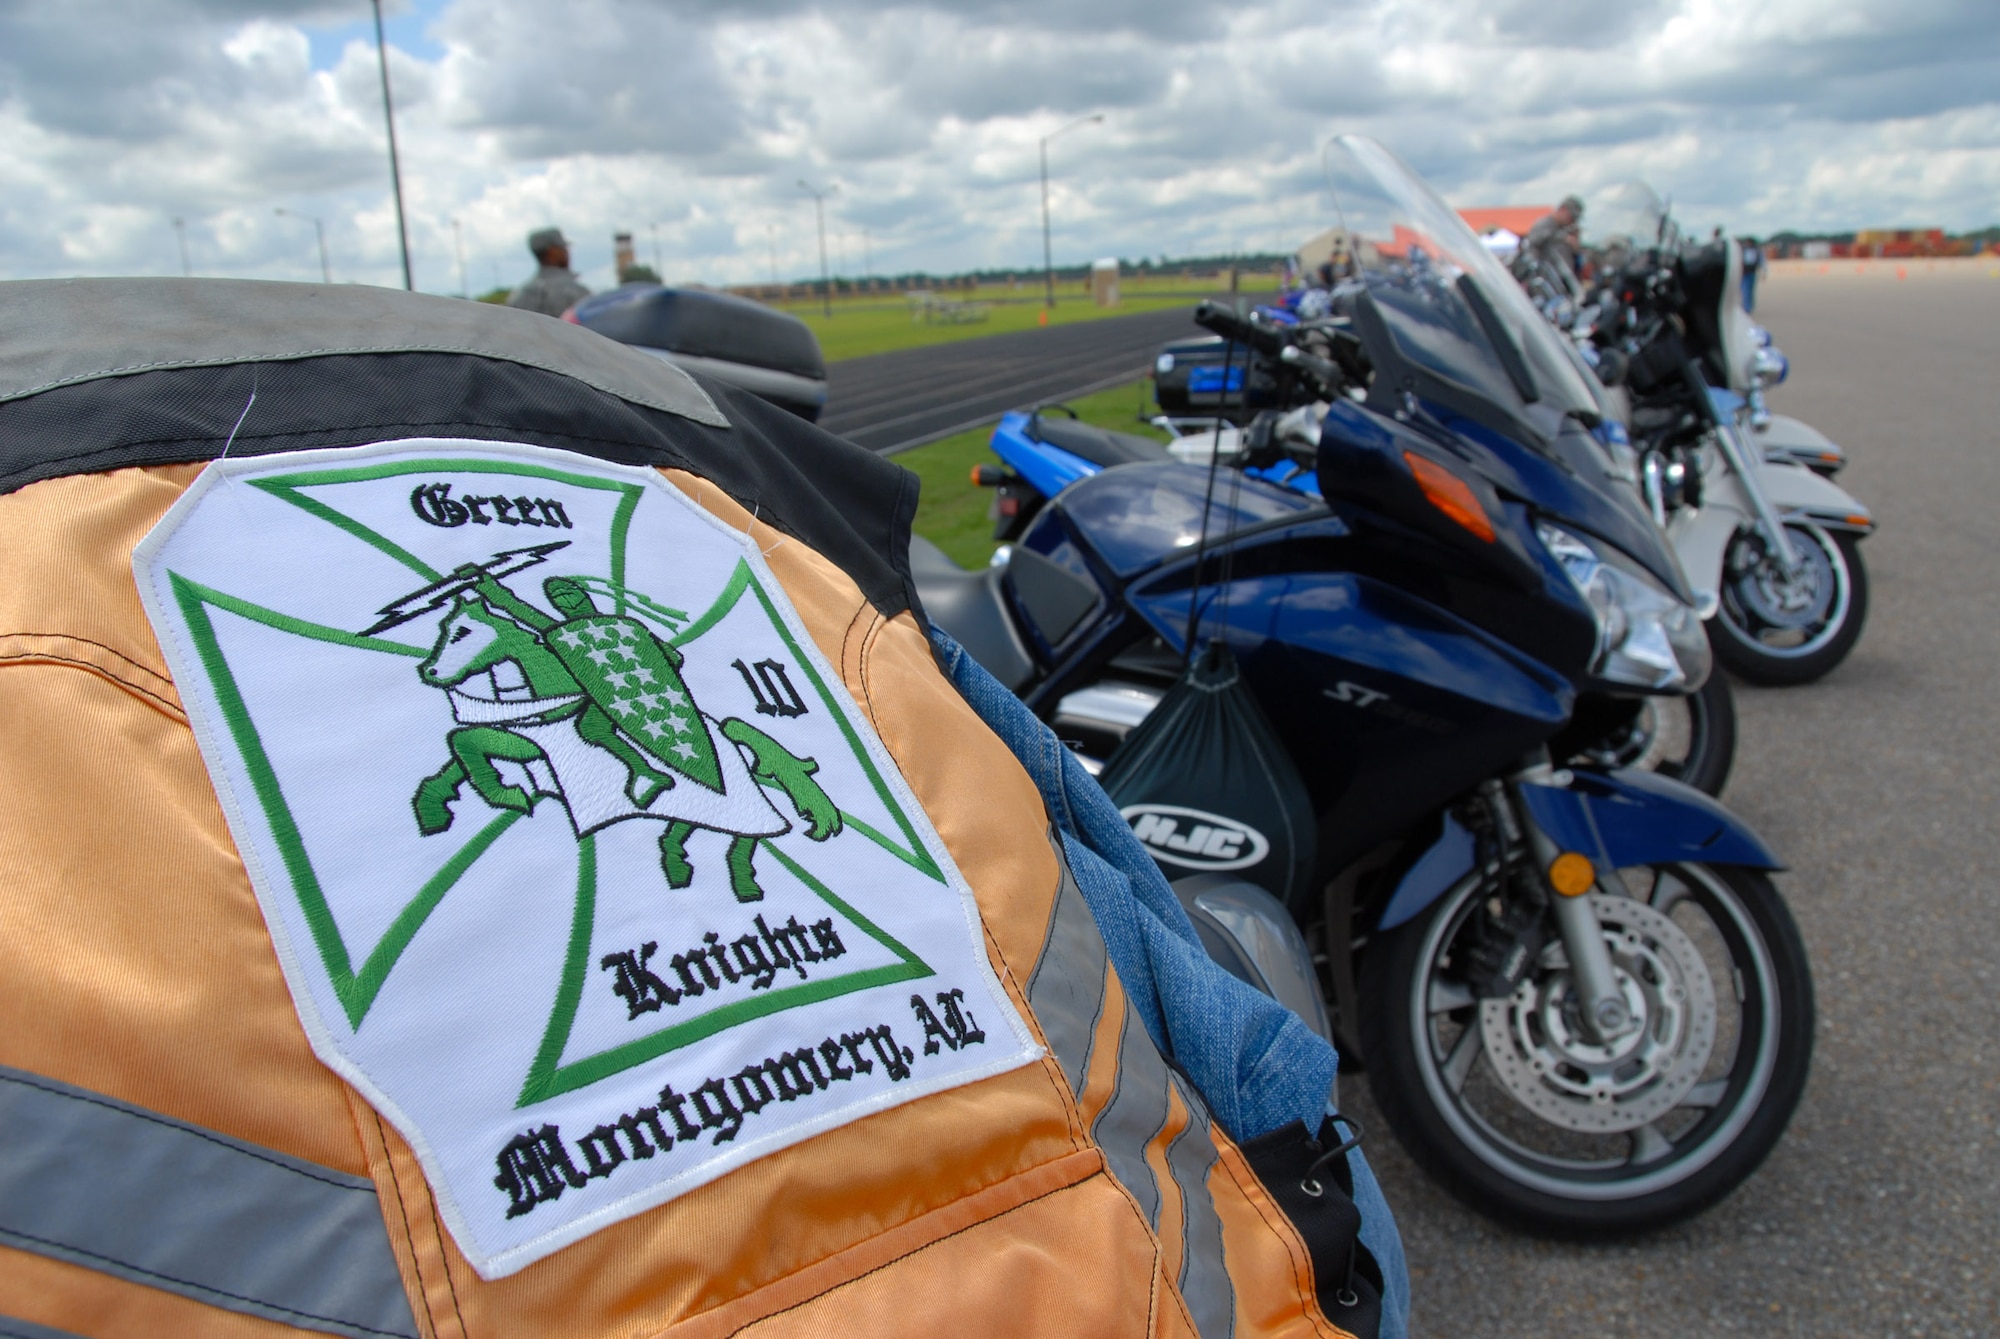 Members of the Green Knights Motorcycle Club, local Chapter 10 held the first annual motorcycle rally Aug. 28 at Maxwell. The rally was held to emphasize motorcycle safety and to garner attention and membership for the Green Knights. (U.S. Air Force photo/Jamie Pitcher)